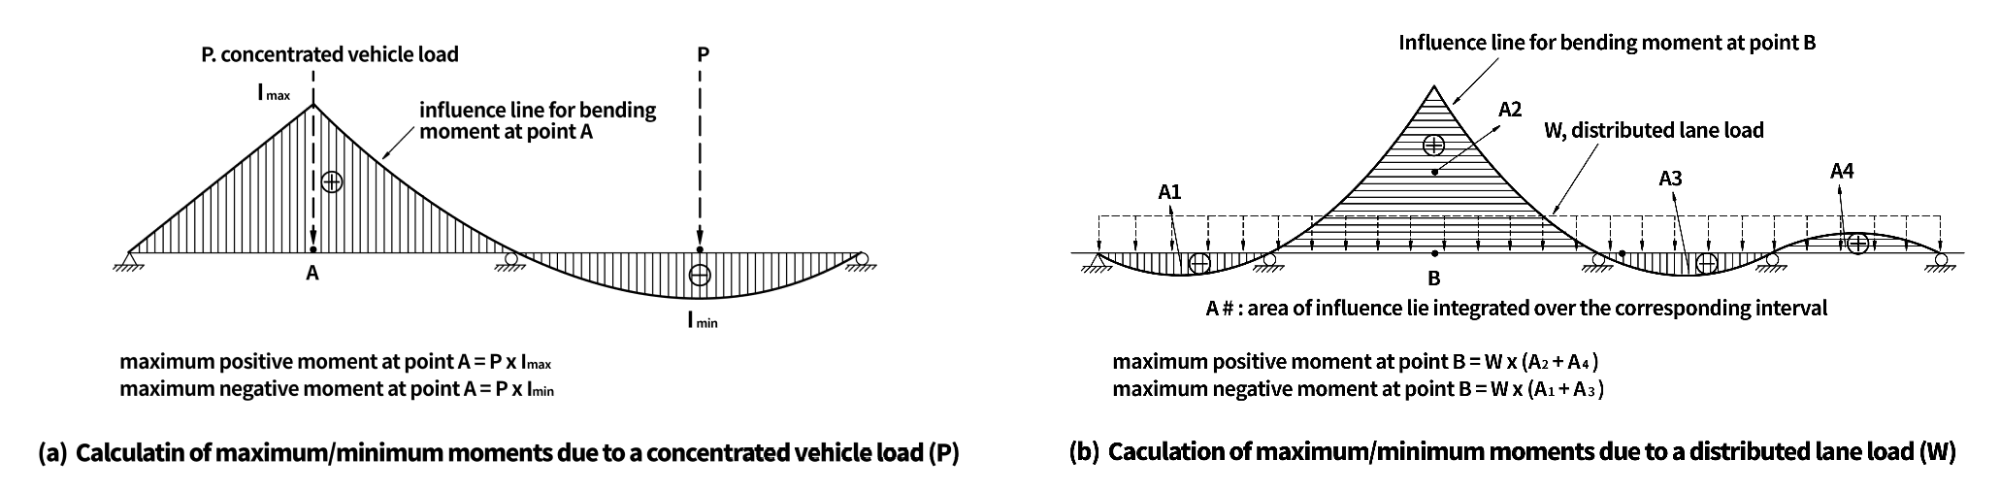 Moving Load Analysis_figure_Calculation of maximum minimum moment using the Influence lines